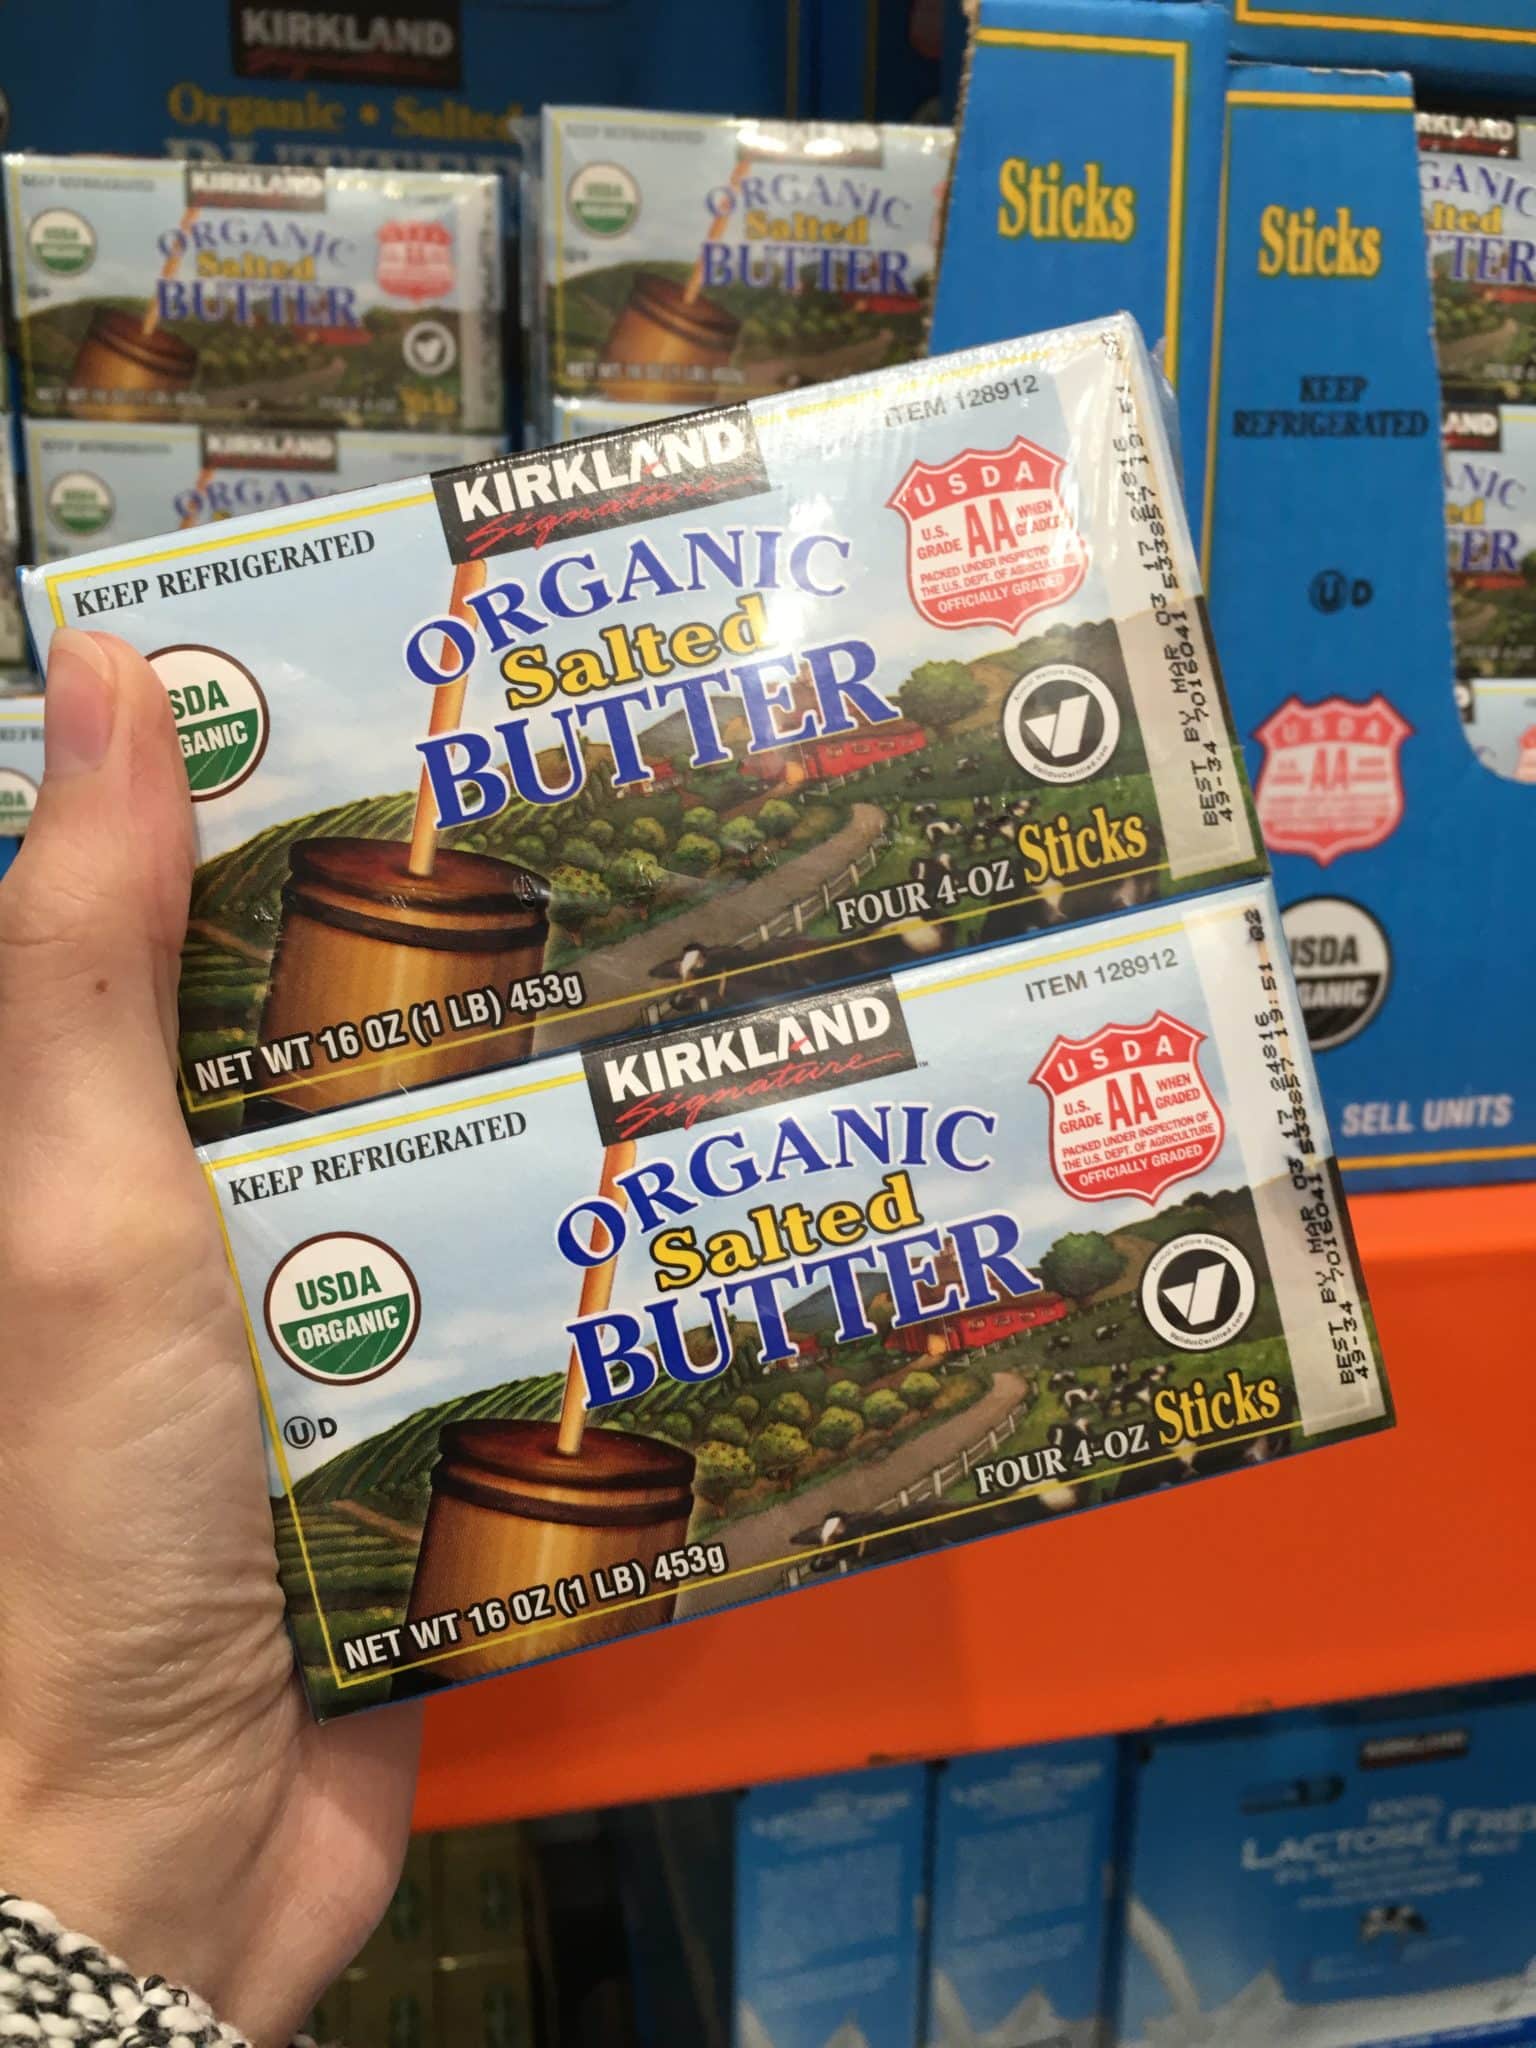 Organic butter from Costco